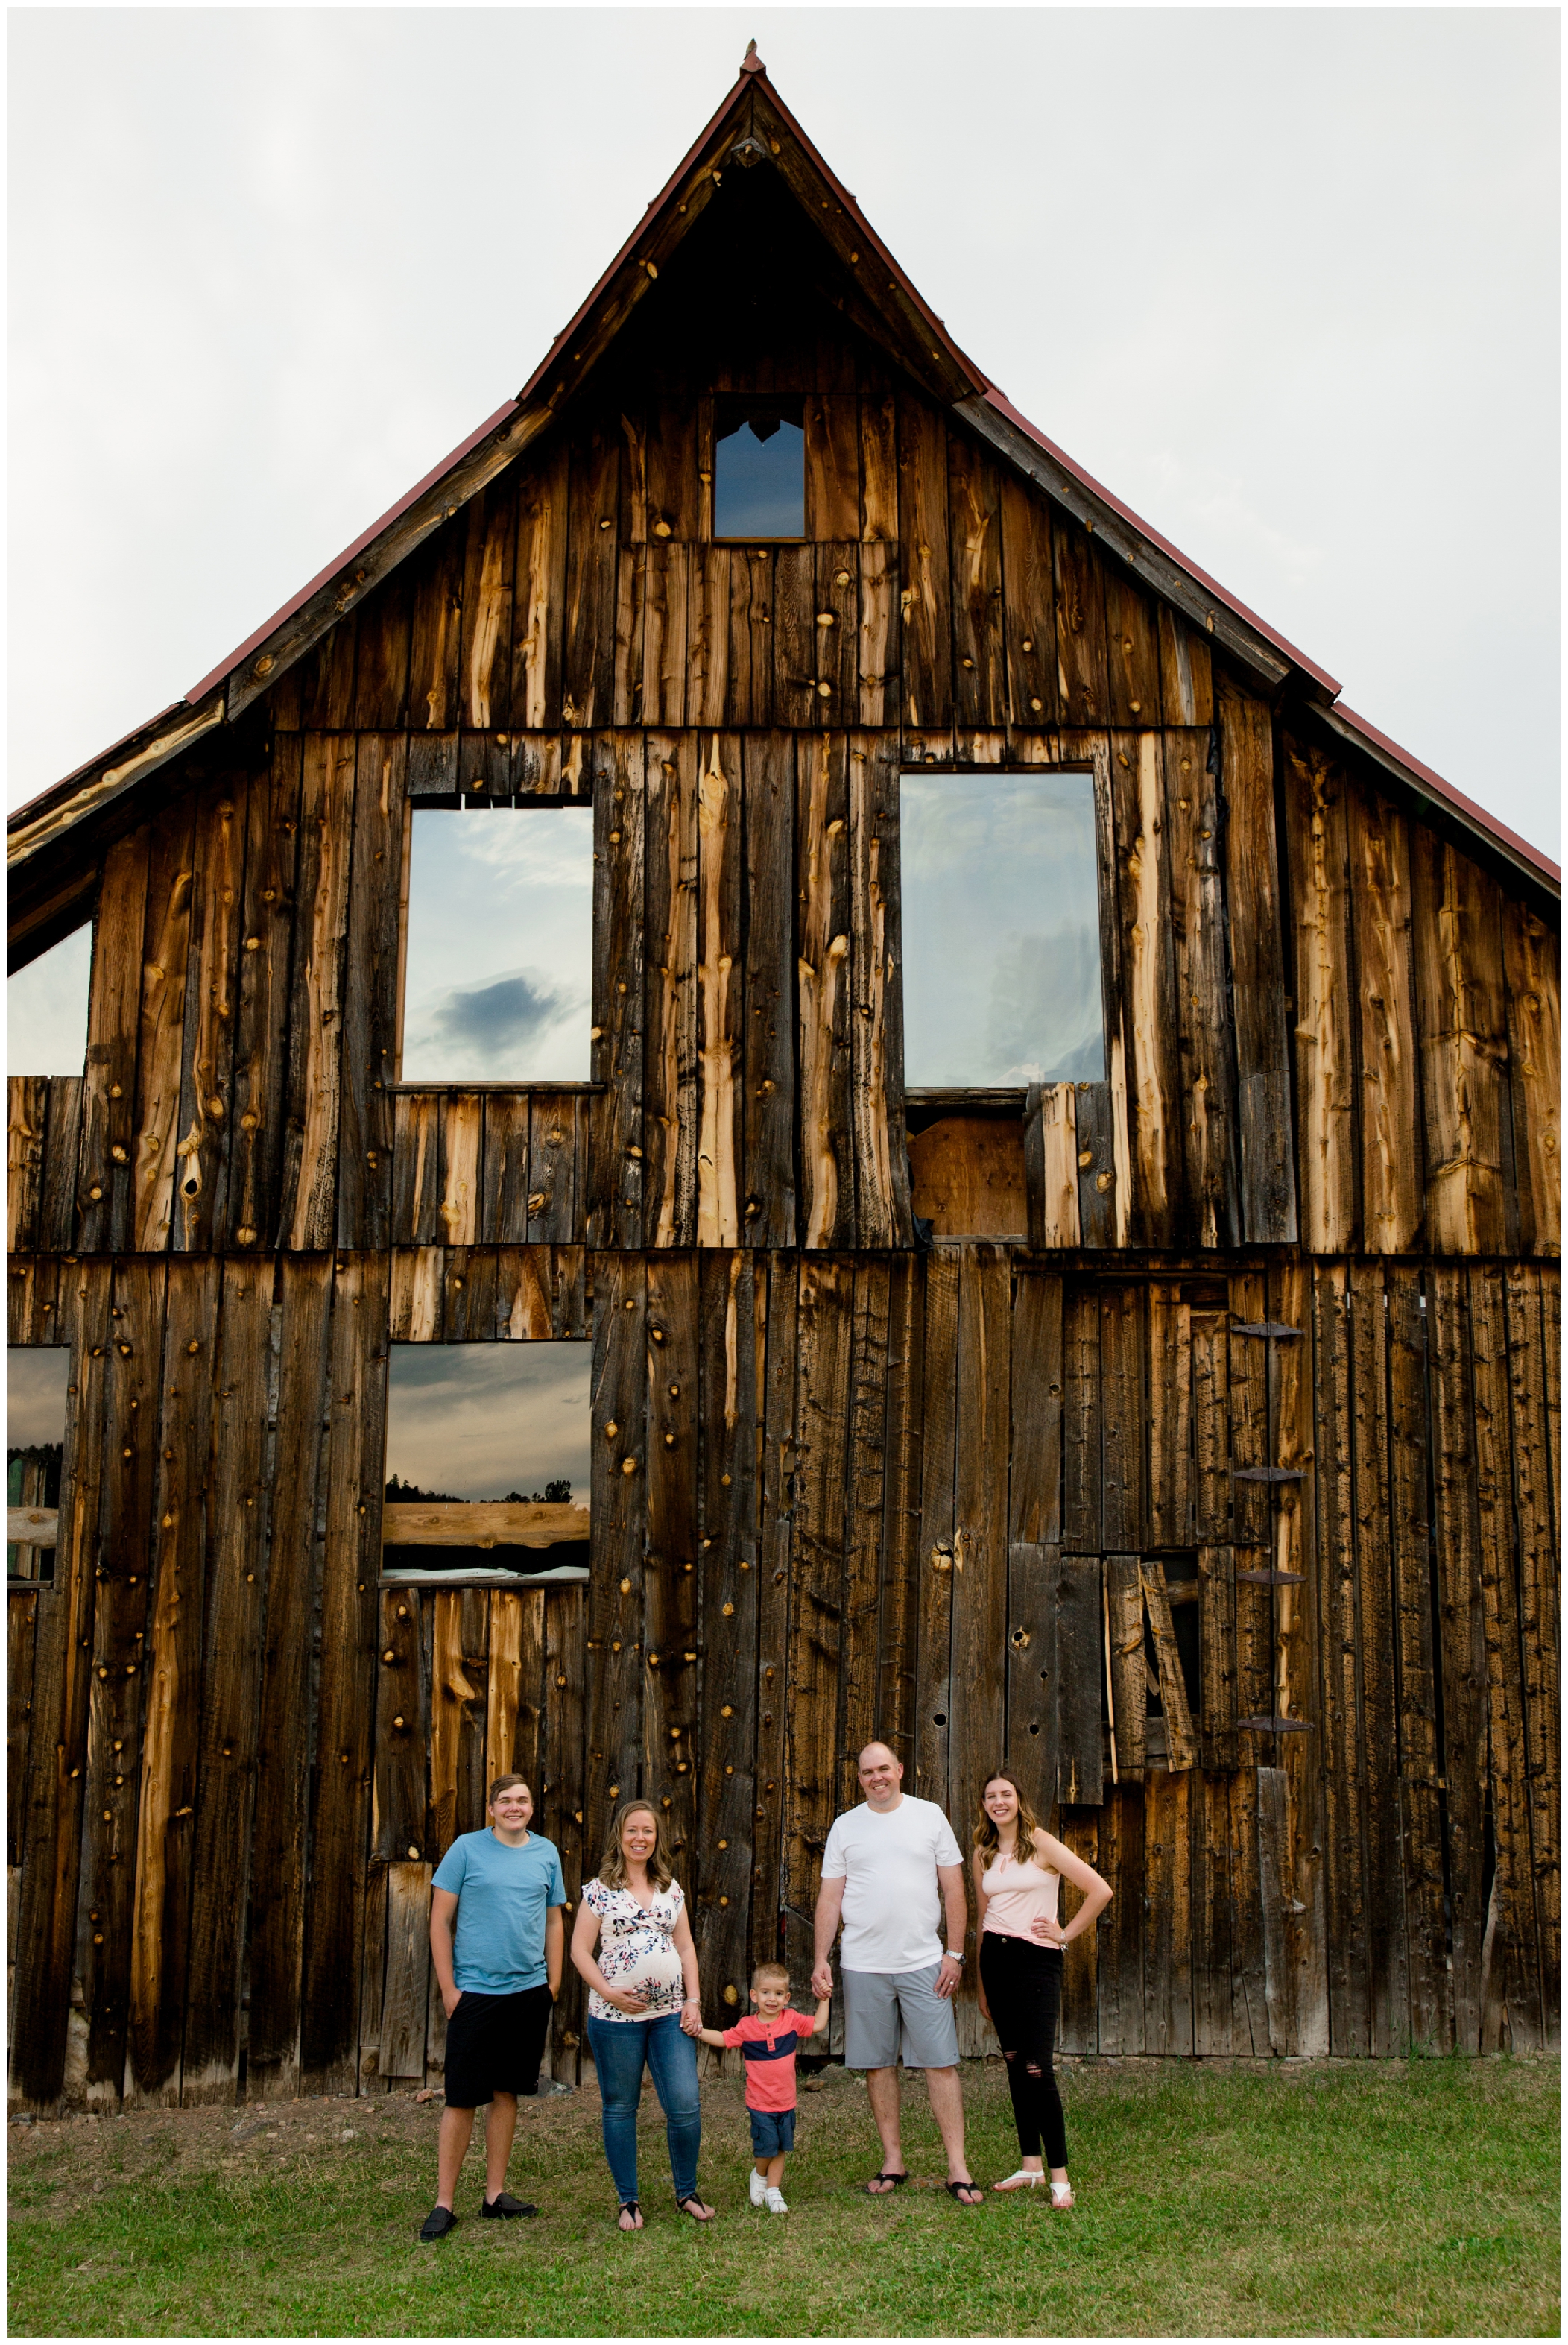 Colorado family maternity photos with rustic barn in background